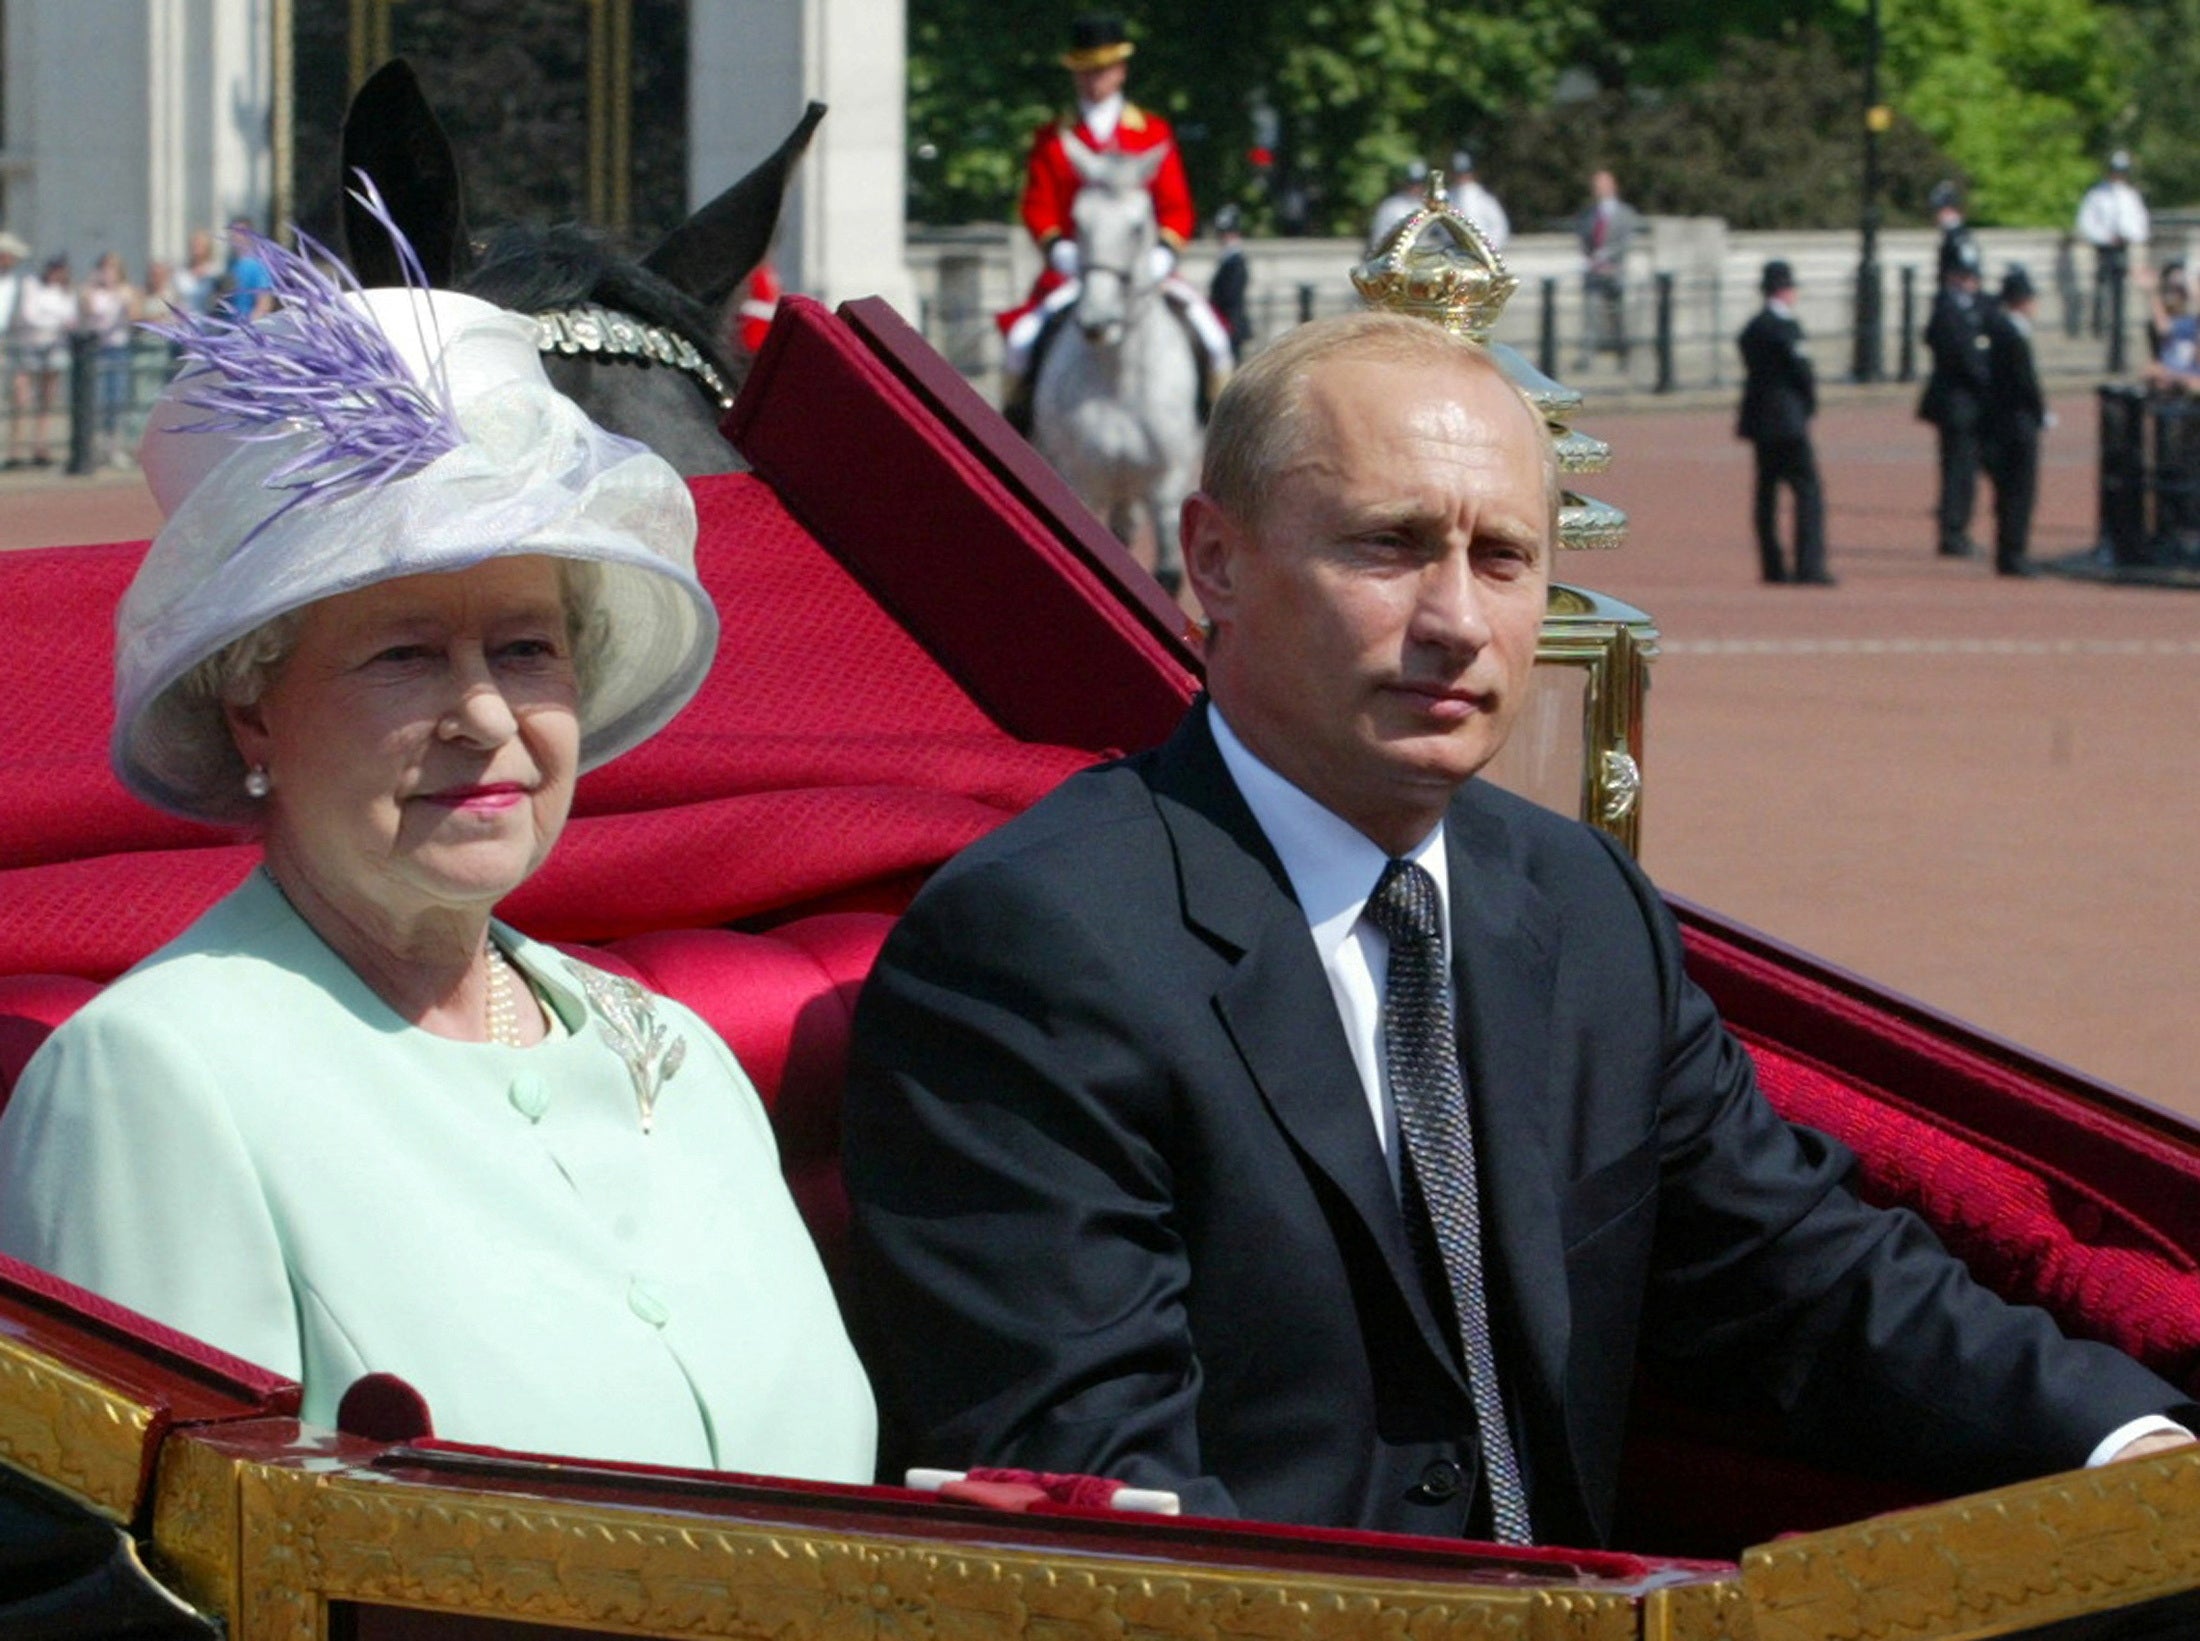 A carriage carrying Britain's Queen Elizabeth II and Russian President Vladimir Putin is escorted by royal guards to Buckingham Palace in central London, Britain, June 24, 2003.